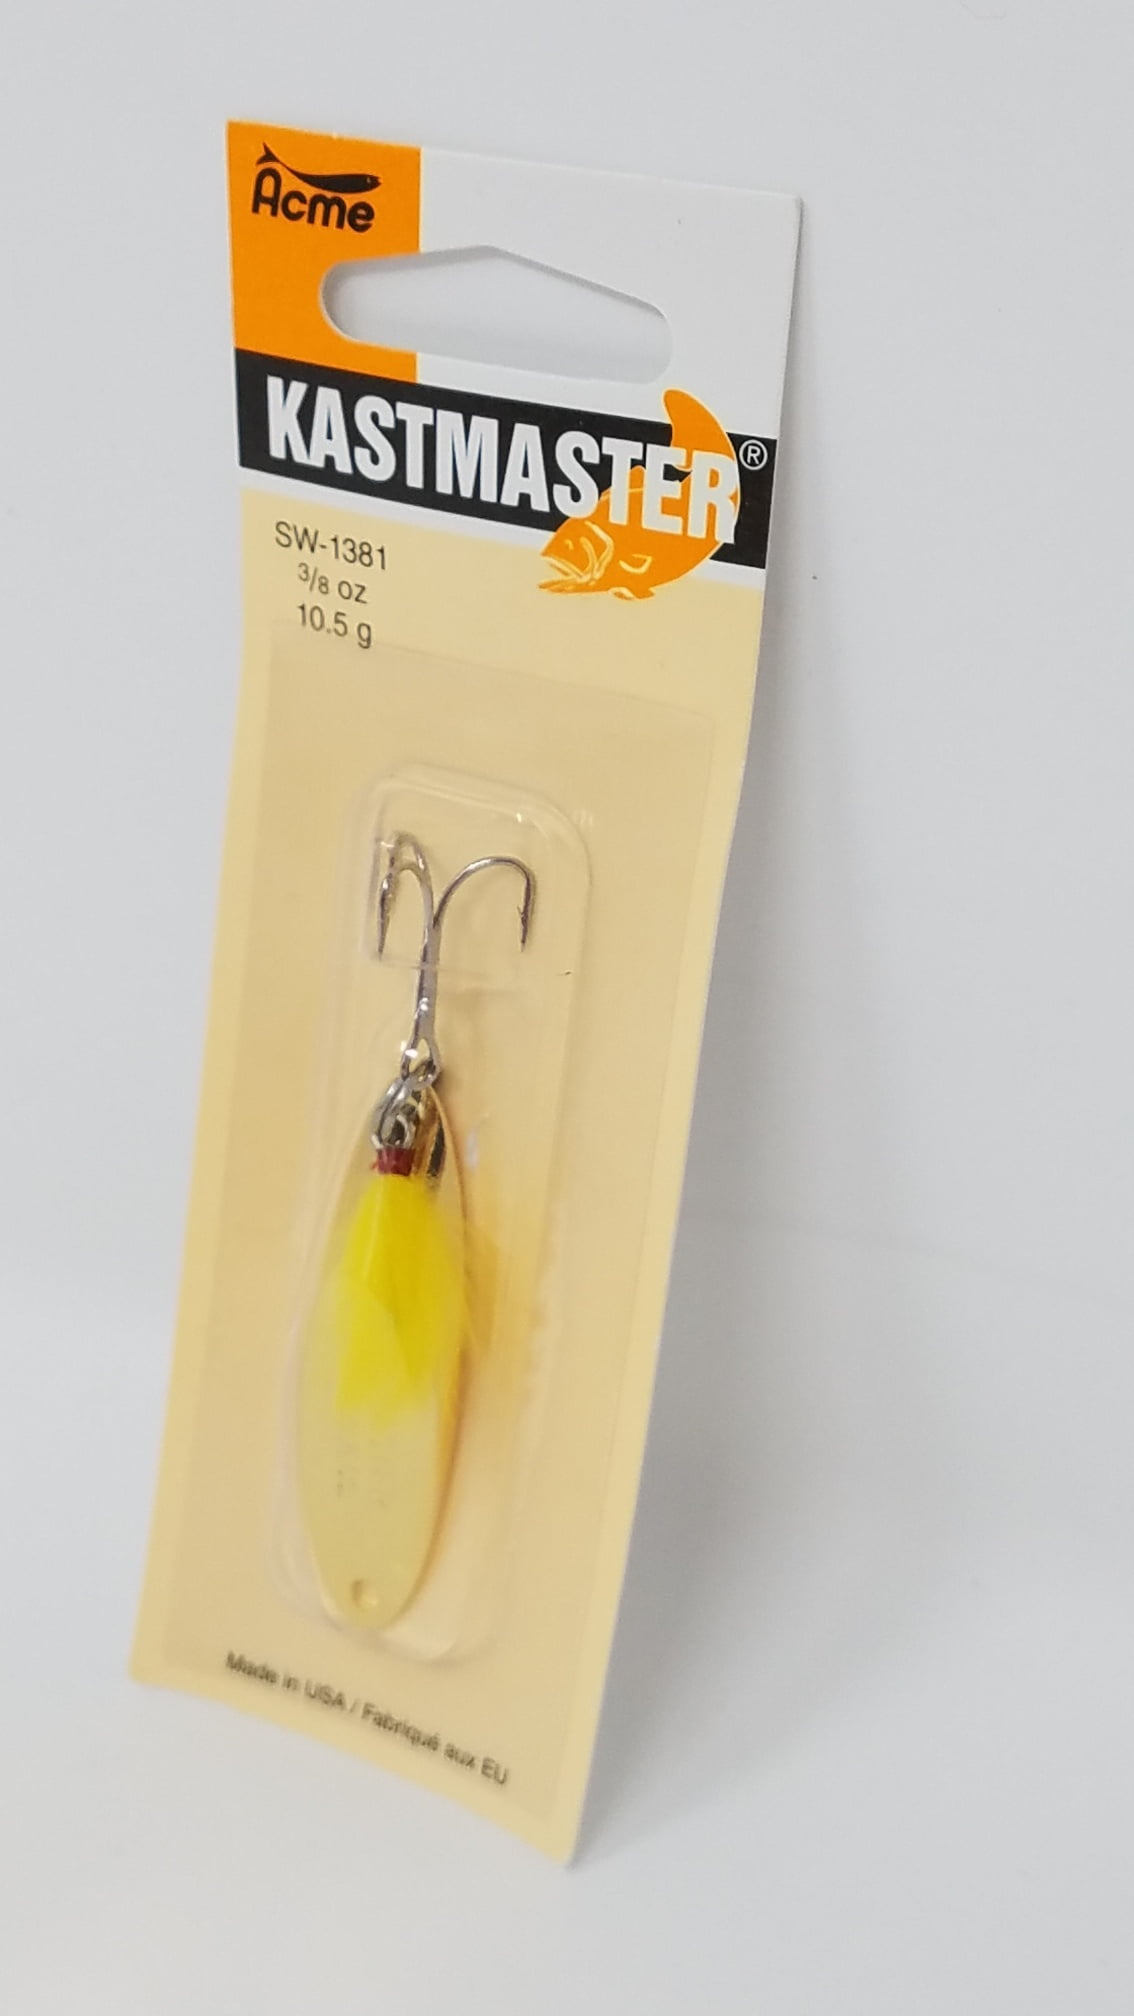 Acme Tackle Kastmaster Bucktail Fishing Lure Spoon Hammered Gold 3/8 oz. 